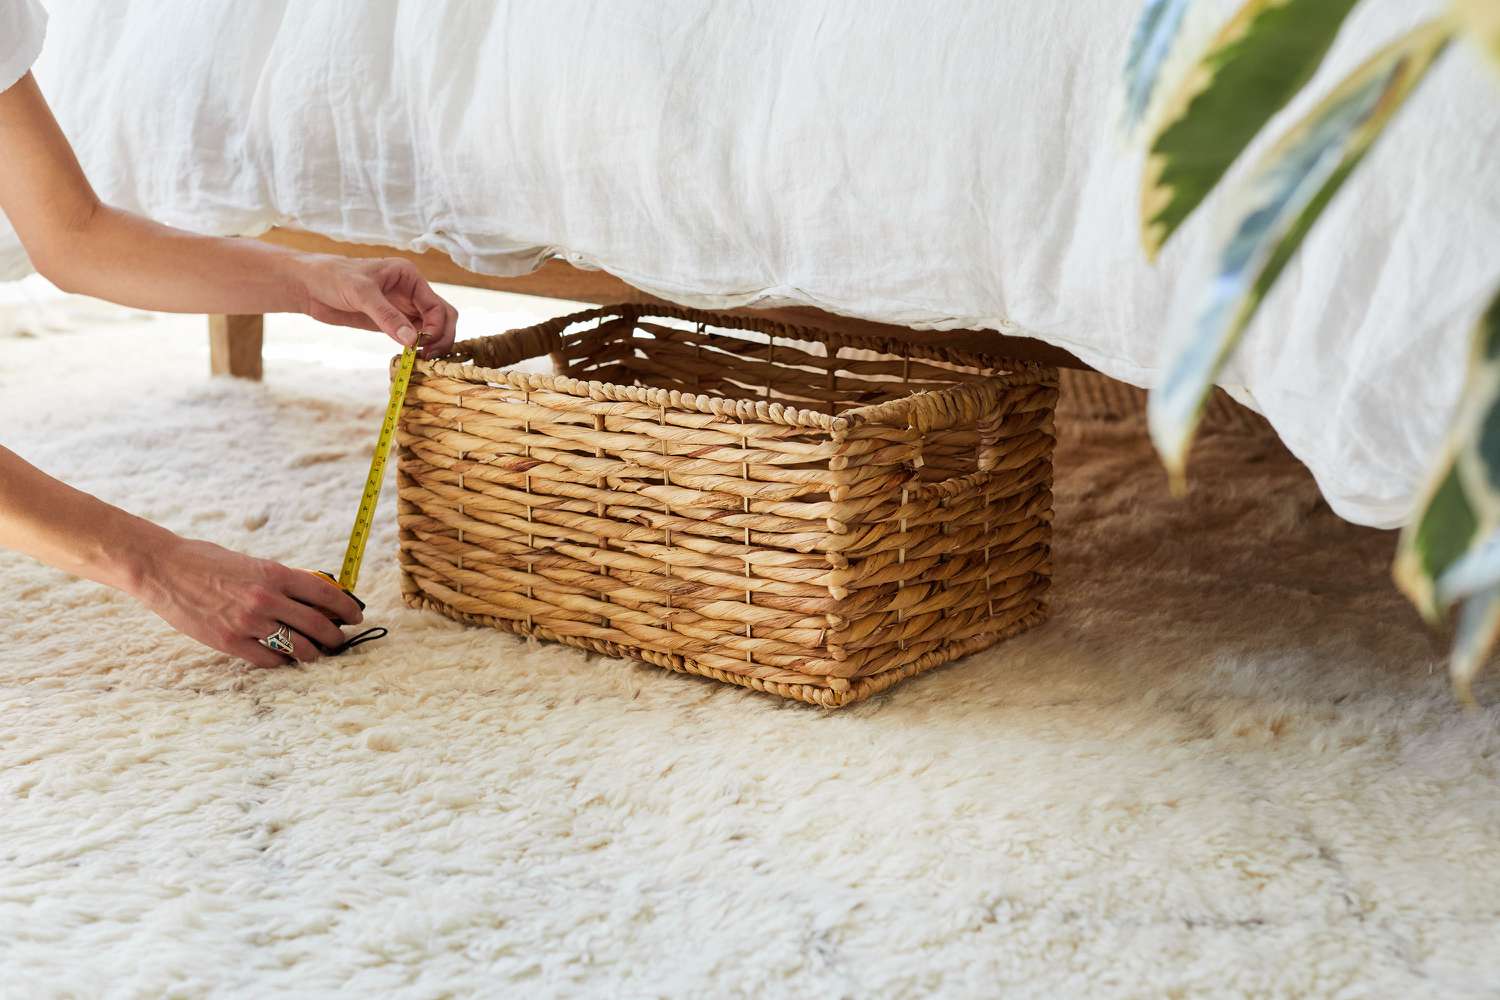 Wicker basket being measured with measuring tape under the bed